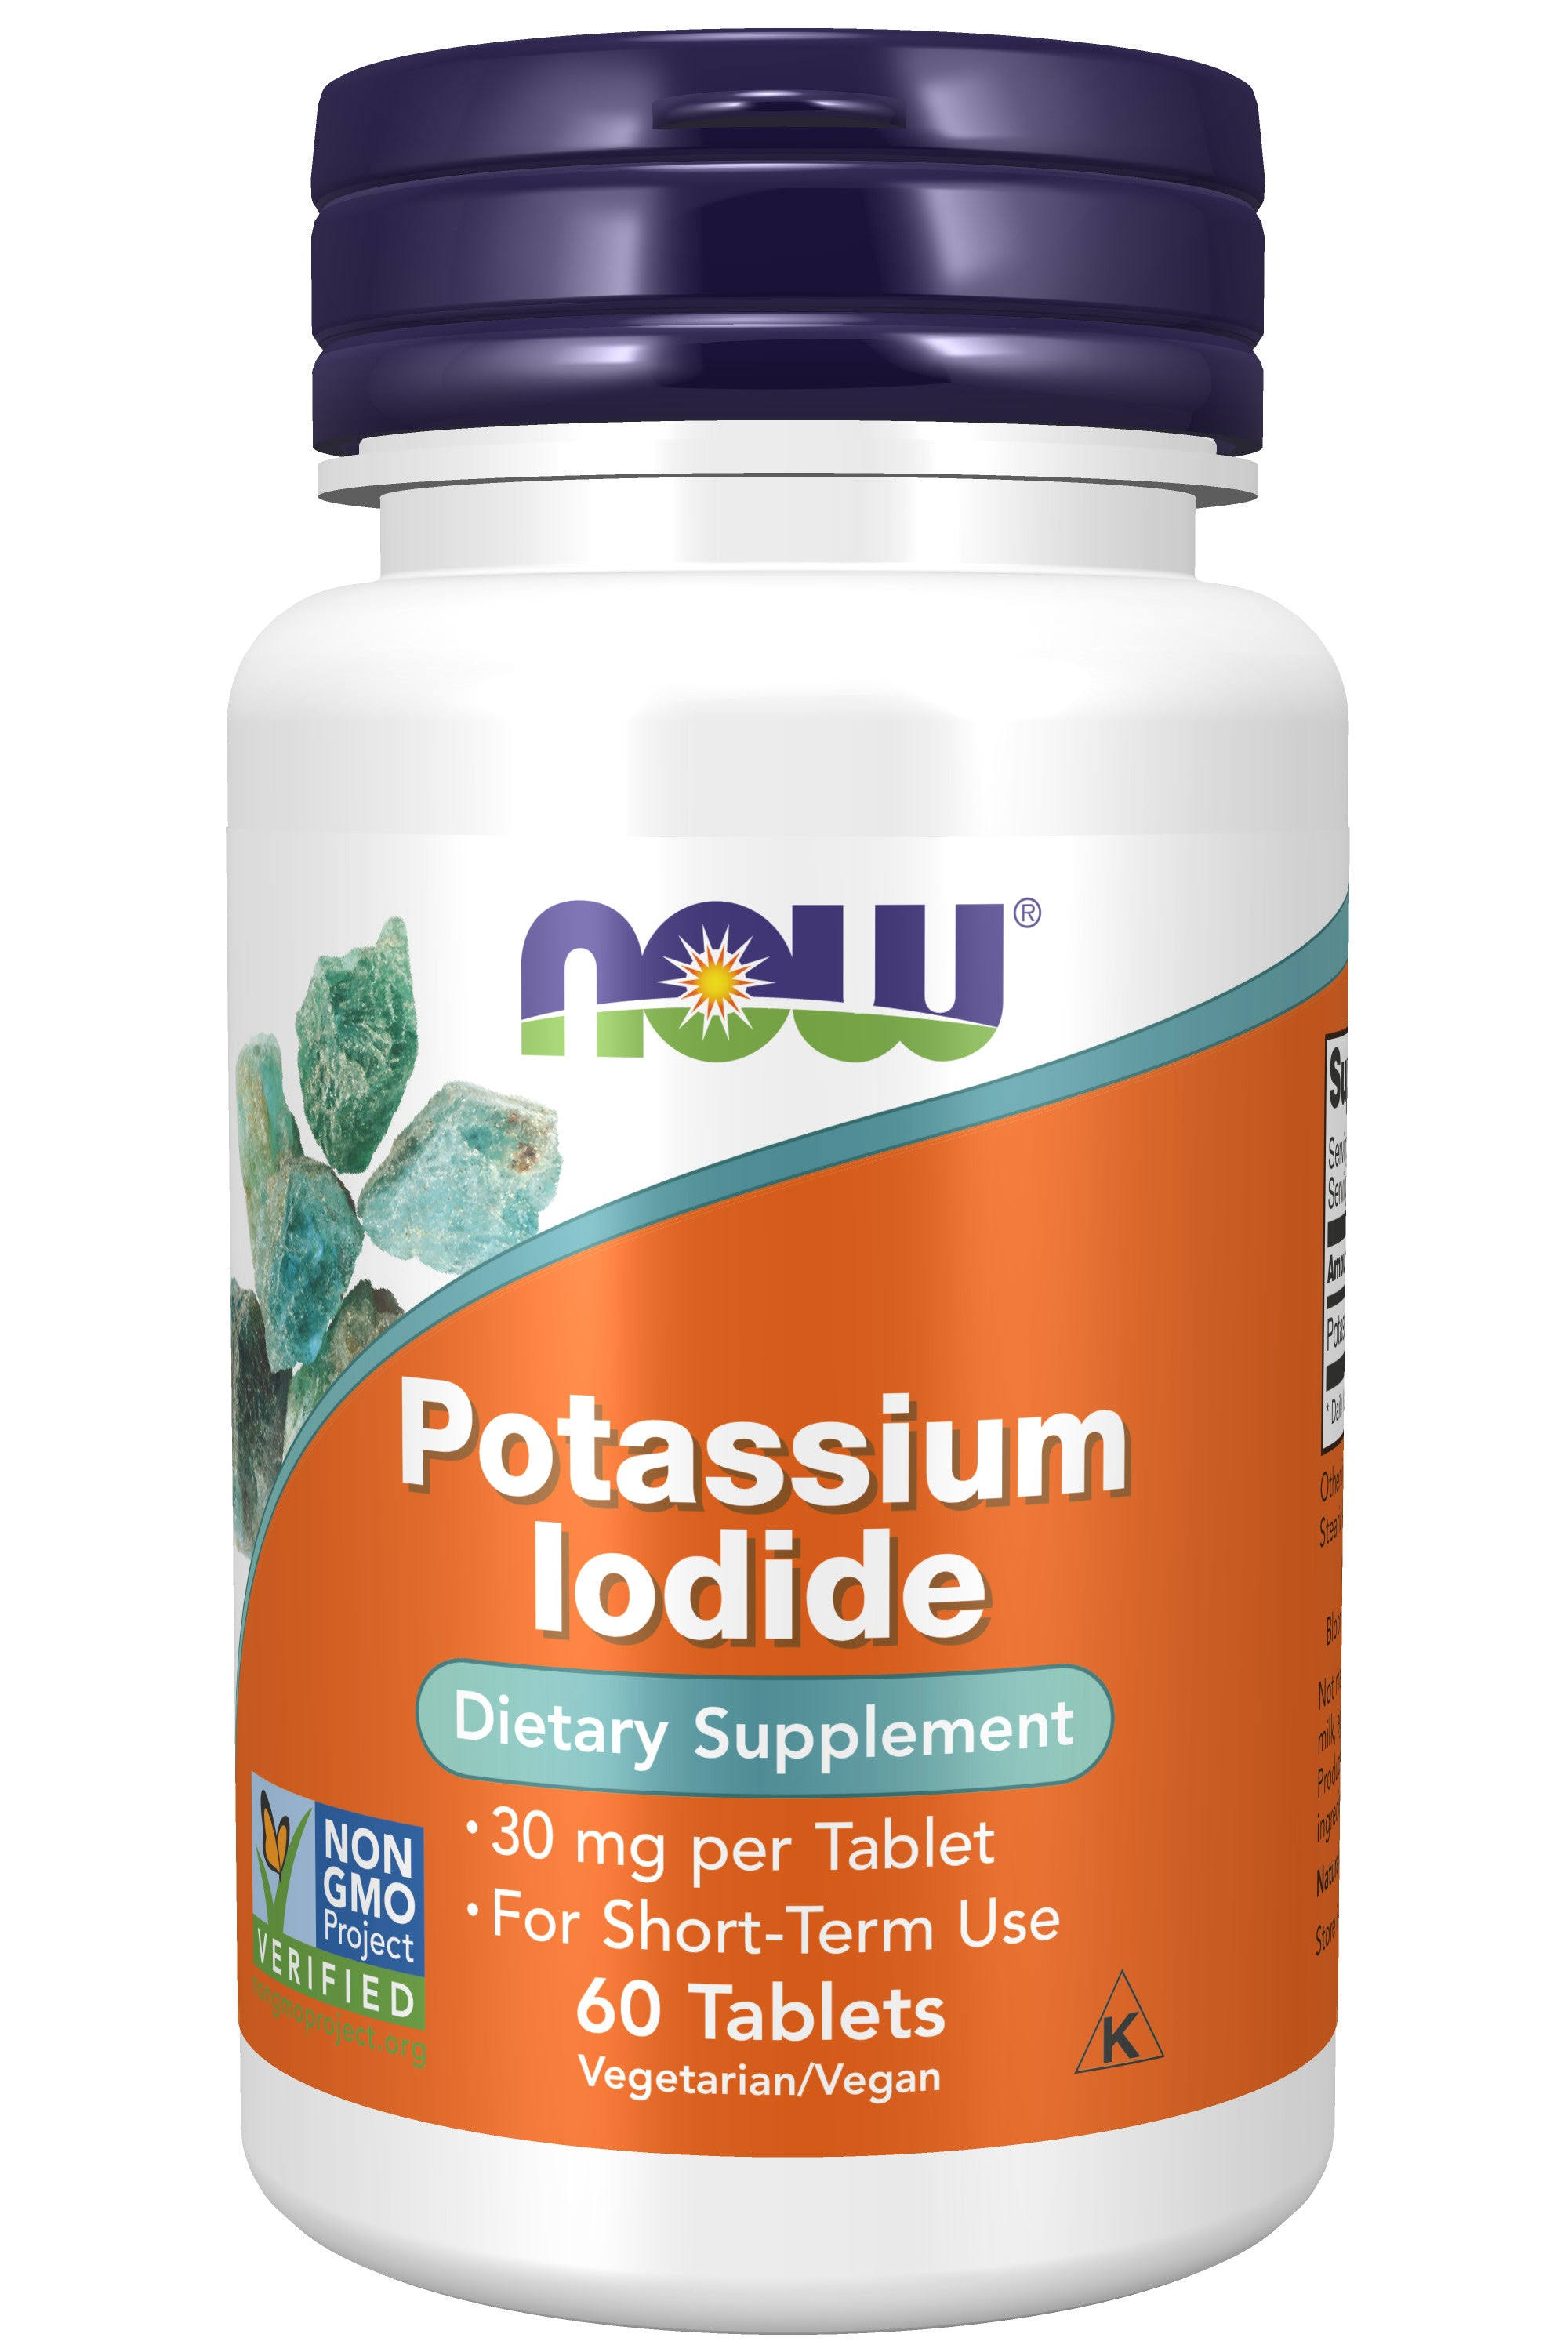 Now Foods Potassium Iodide Dietary Supplement - 30mg, 60 Tablets